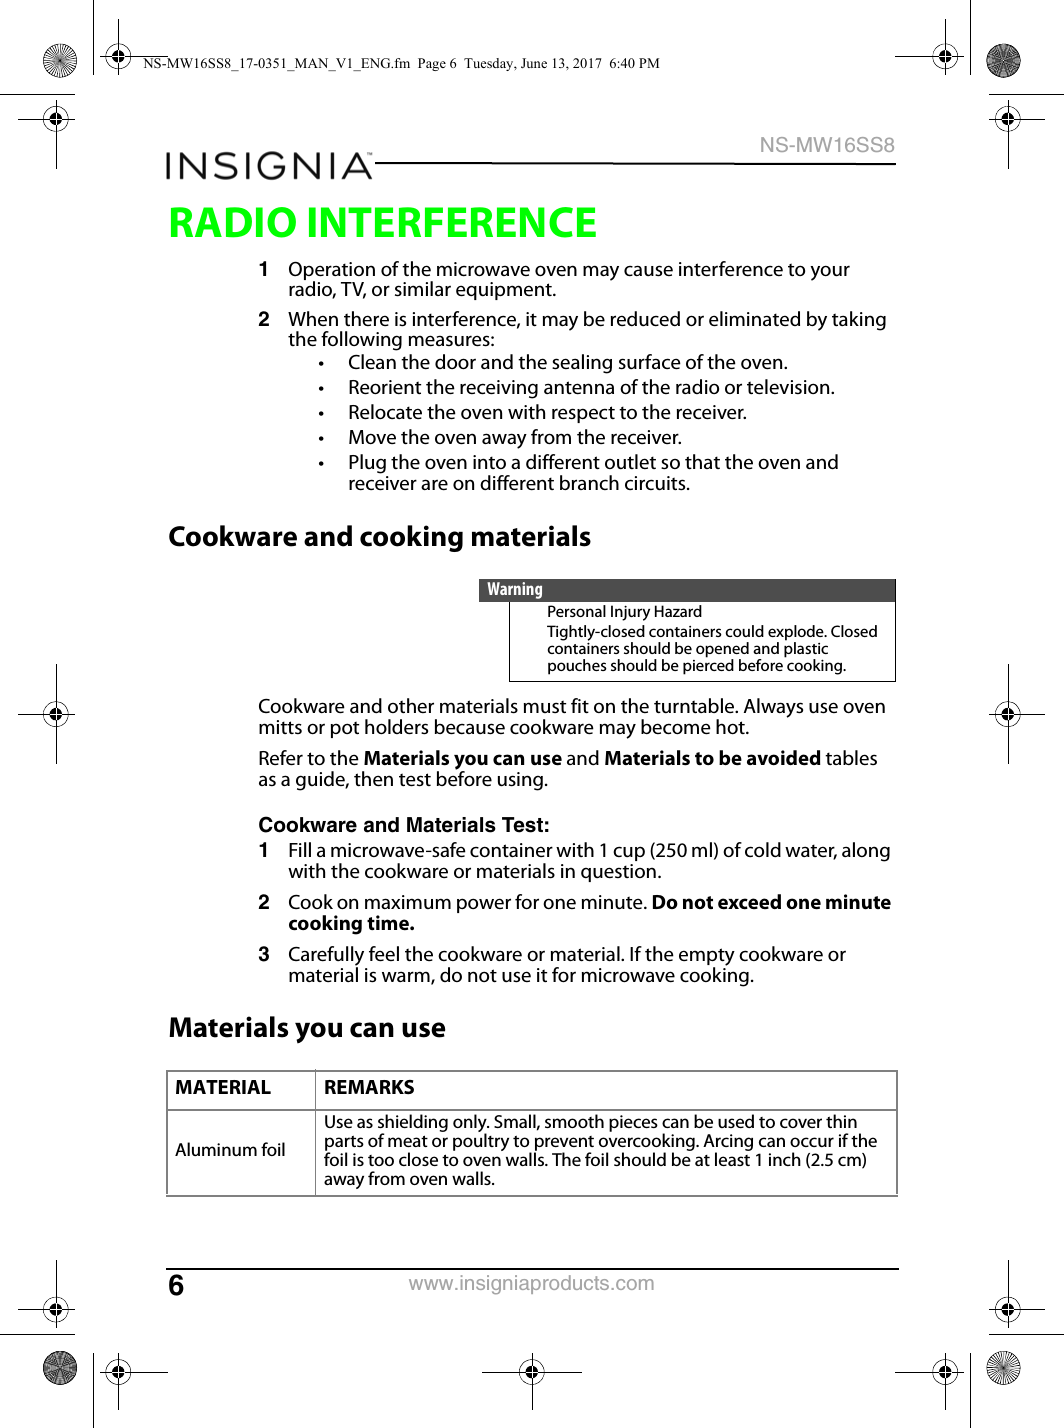 6NS-MW16SS8www.insigniaproducts.comRADIO INTERFERENCE1Operation of the microwave oven may cause interference to your radio, TV, or similar equipment.2When there is interference, it may be reduced or eliminated by taking the following measures:• Clean the door and the sealing surface of the oven.• Reorient the receiving antenna of the radio or television.• Relocate the oven with respect to the receiver.• Move the oven away from the receiver.• Plug the oven into a different outlet so that the oven and receiver are on different branch circuits.Cookware and cooking materialsCookware and other materials must fit on the turntable. Always use oven mitts or pot holders because cookware may become hot.Refer to the Materials you can use and Materials to be avoided tables as a guide, then test before using.Cookware and Materials Test:1Fill a microwave-safe container with 1 cup (250 ml) of cold water, along with the cookware or materials in question.2Cook on maximum power for one minute. Do not exceed one minute cooking time.3Carefully feel the cookware or material. If the empty cookware or material is warm, do not use it for microwave cooking.Materials you can useWarningPersonal Injury HazardTightly-closed containers could explode. Closed containers should be opened and plastic pouches should be pierced before cooking.MATERIAL REMARKSAluminum foilUse as shielding only. Small, smooth pieces can be used to cover thin parts of meat or poultry to prevent overcooking. Arcing can occur if the foil is too close to oven walls. The foil should be at least 1 inch (2.5 cm) away from oven walls.NS-MW16SS8_17-0351_MAN_V1_ENG.fm  Page 6  Tuesday, June 13, 2017  6:40 PM